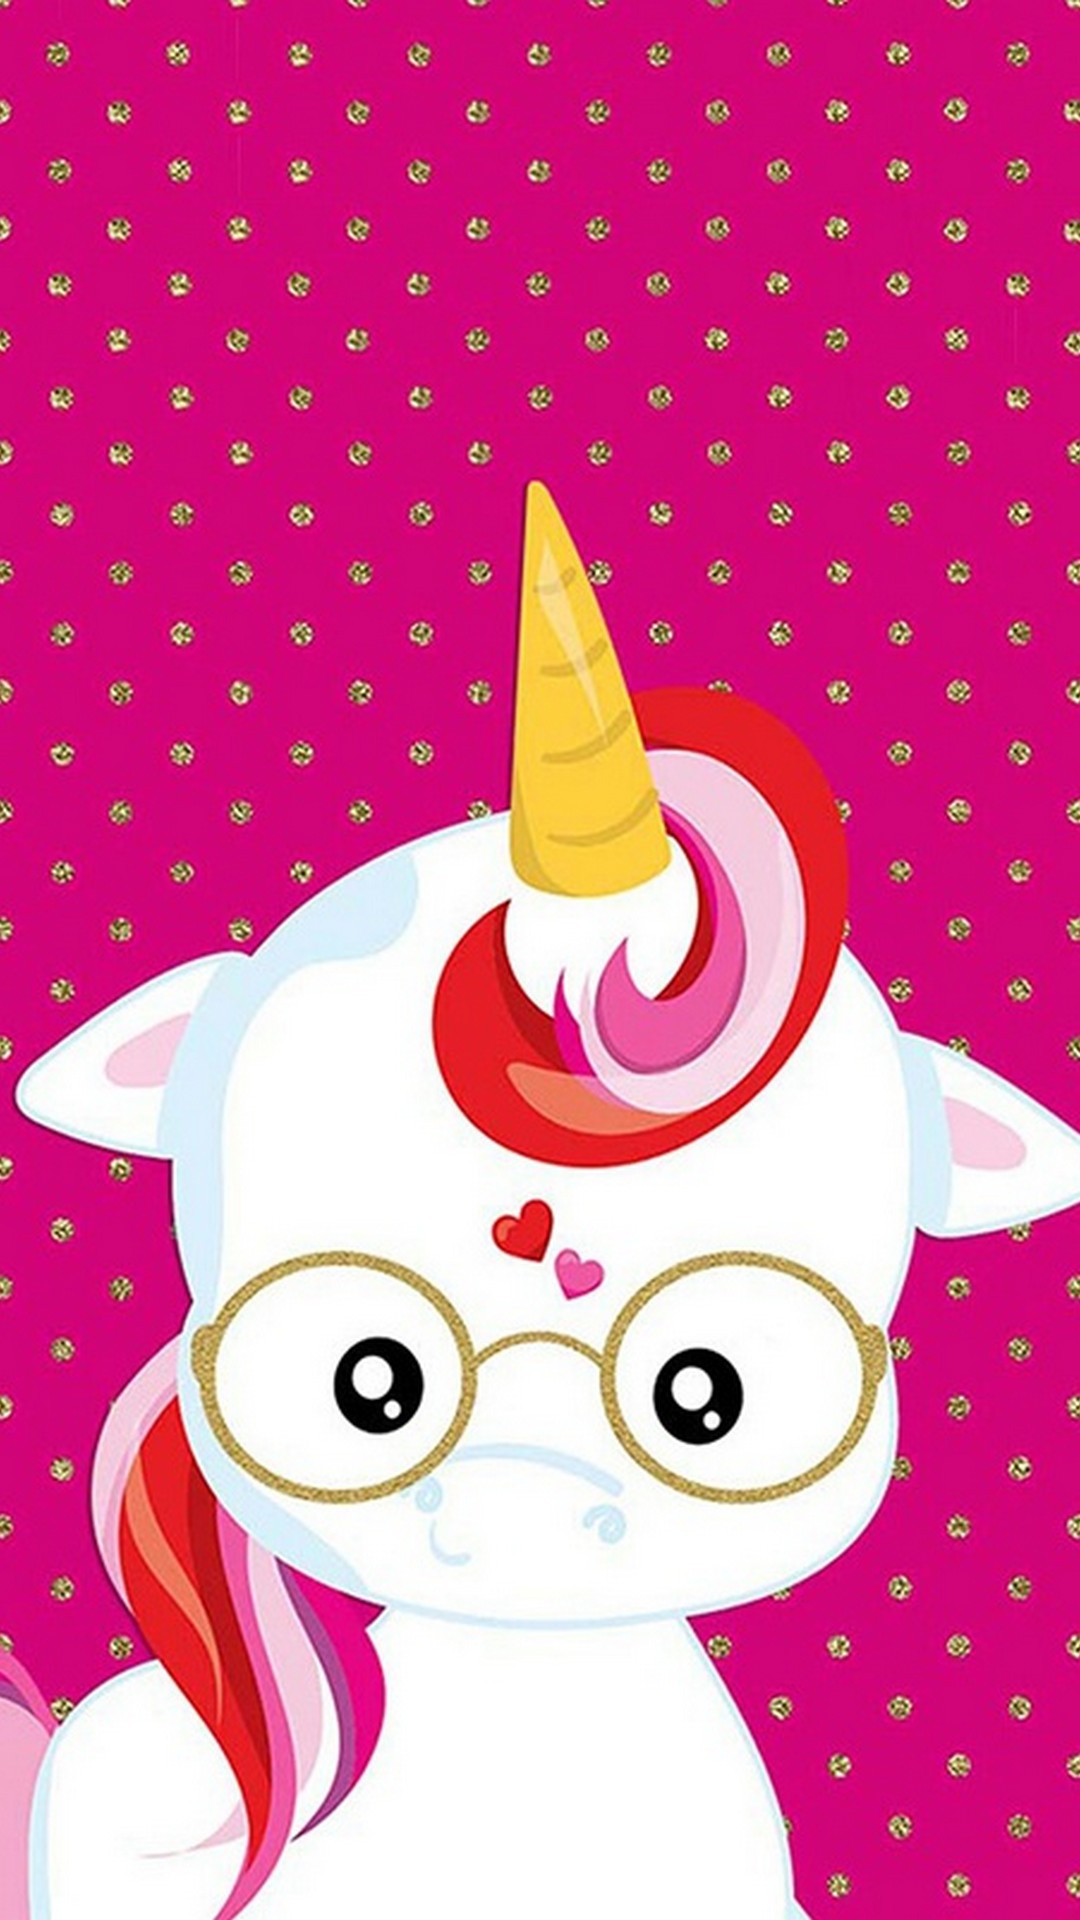 Unicorn Iphone Wallpaper In Hd With High-resolution - Unicorn Wallpaper Hd Iphone , HD Wallpaper & Backgrounds